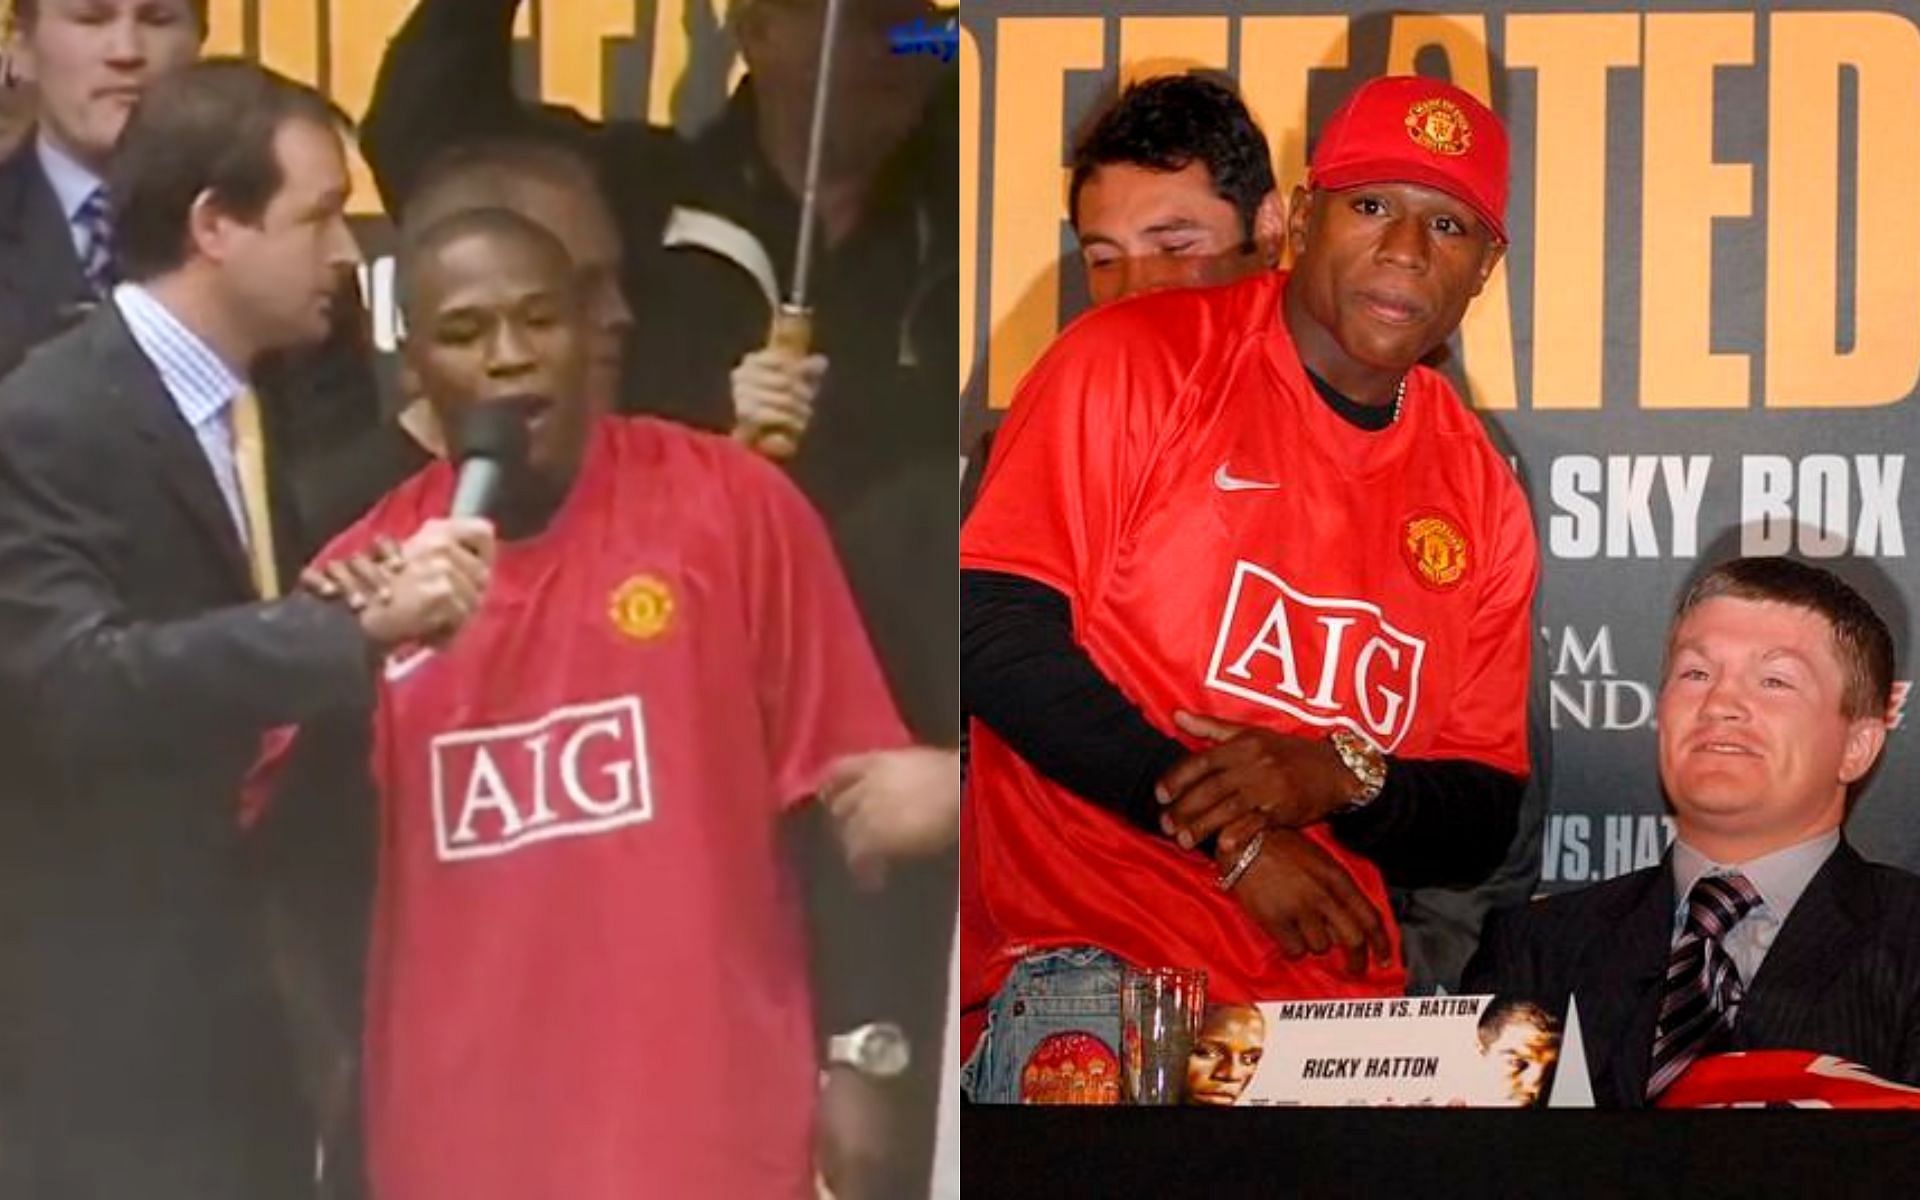 Floyd Mayweather on stage with a Manchester United jersey (left) and Floyd Mayweather standing next to Ricky Hatton (right) (Image credits @Ero_senniN__ and @SkySportsBoxing on Twitter)